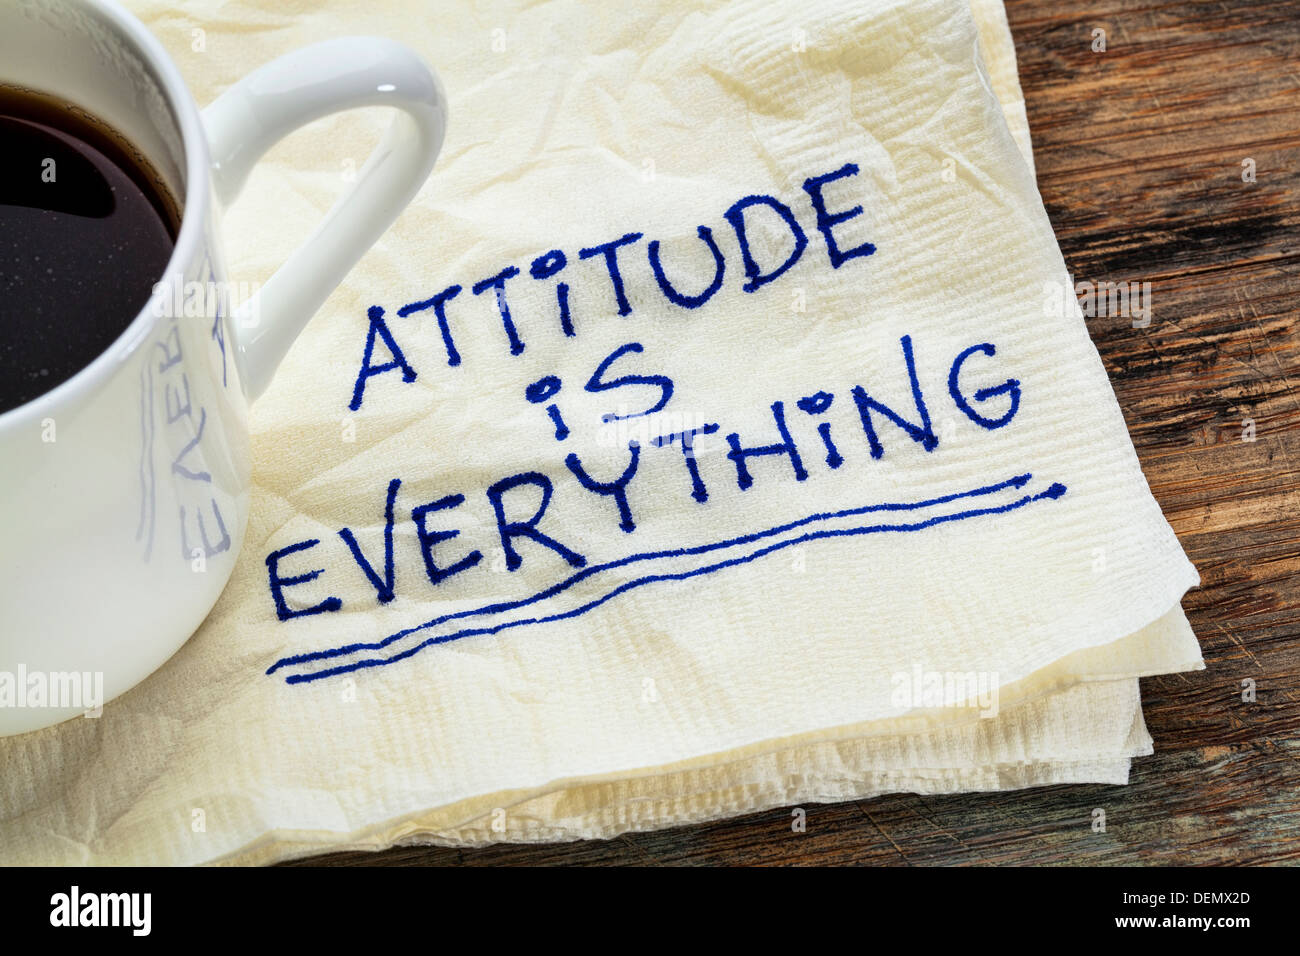 attitude is everything - motivational slogan on a napkin with a cup of coffee Stock Photo